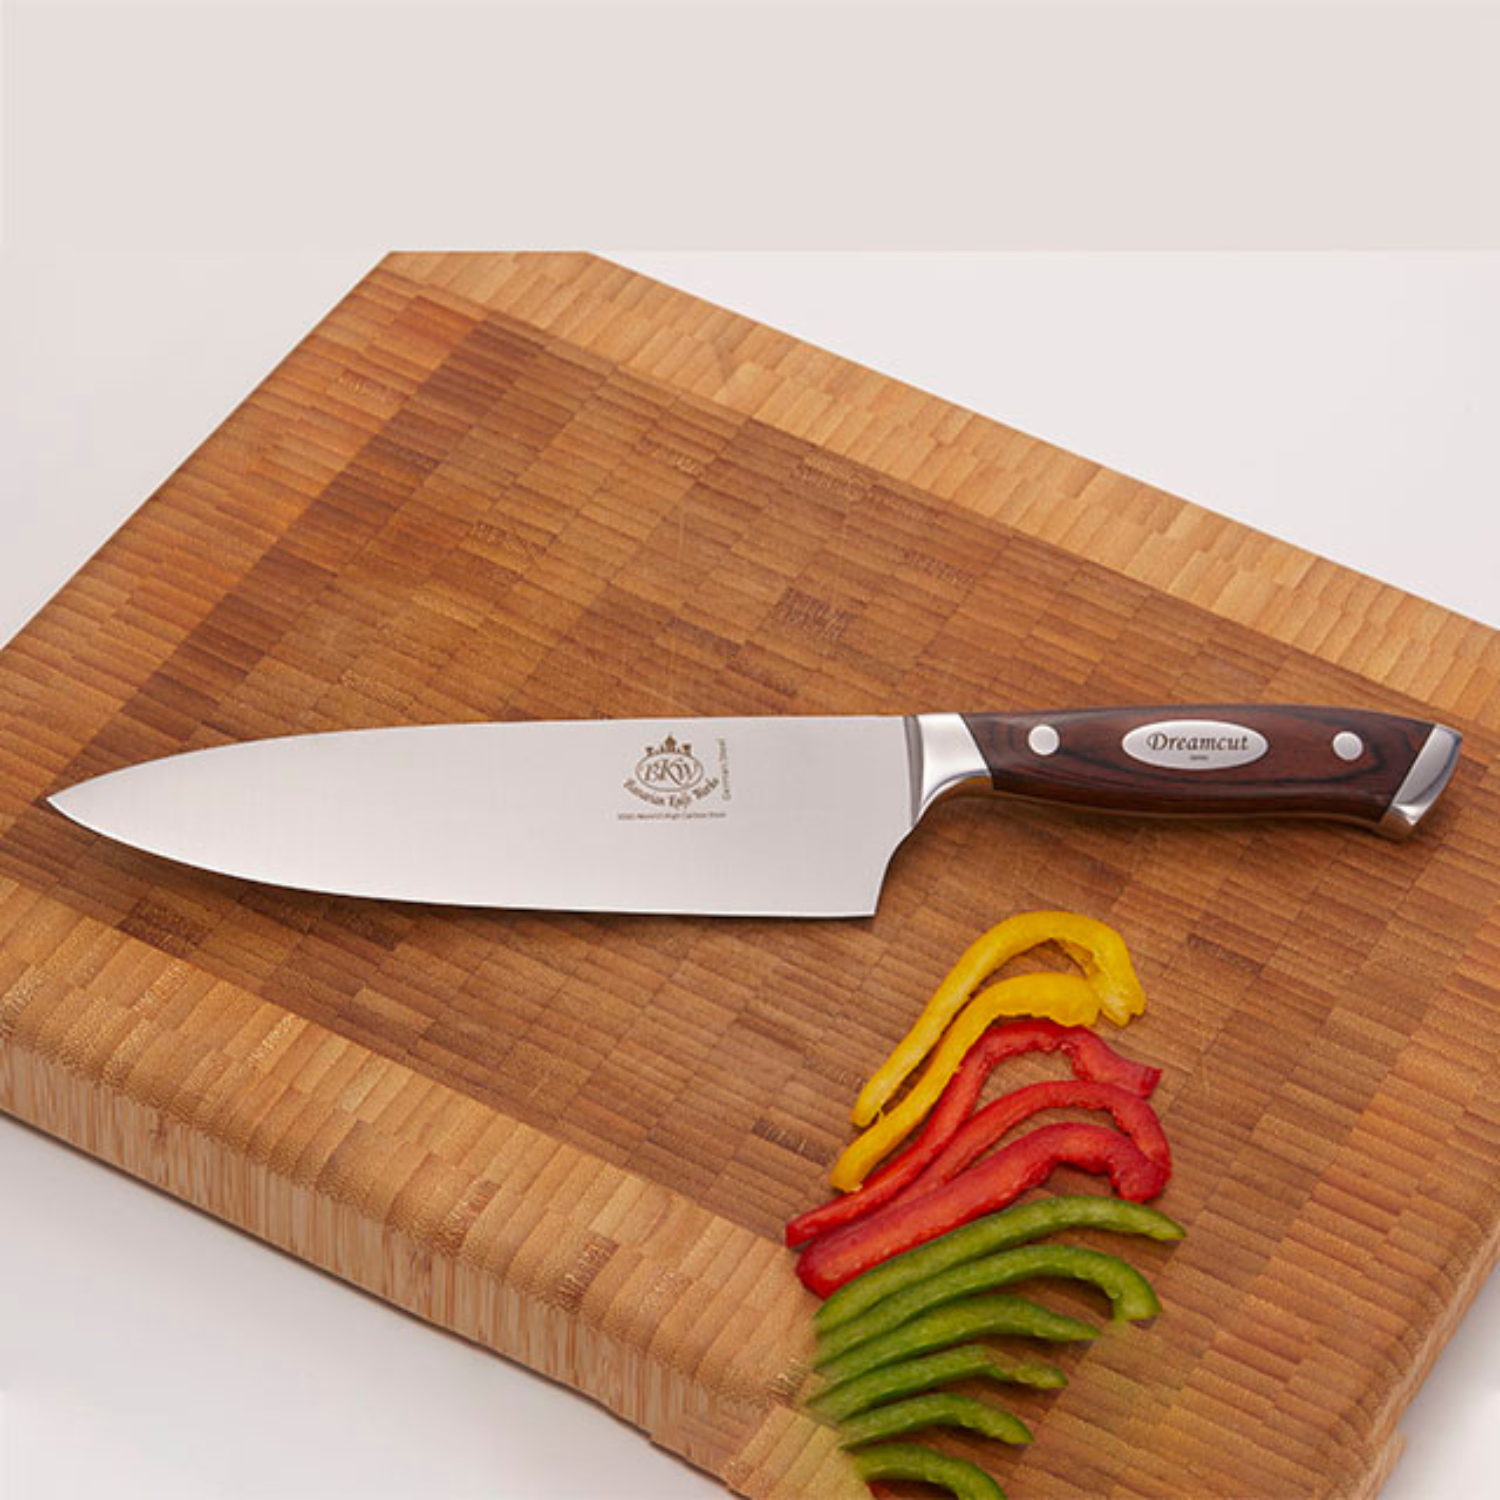 VICTORINOX ROSEWOOD 10 INCH CHEF'S KNIFE